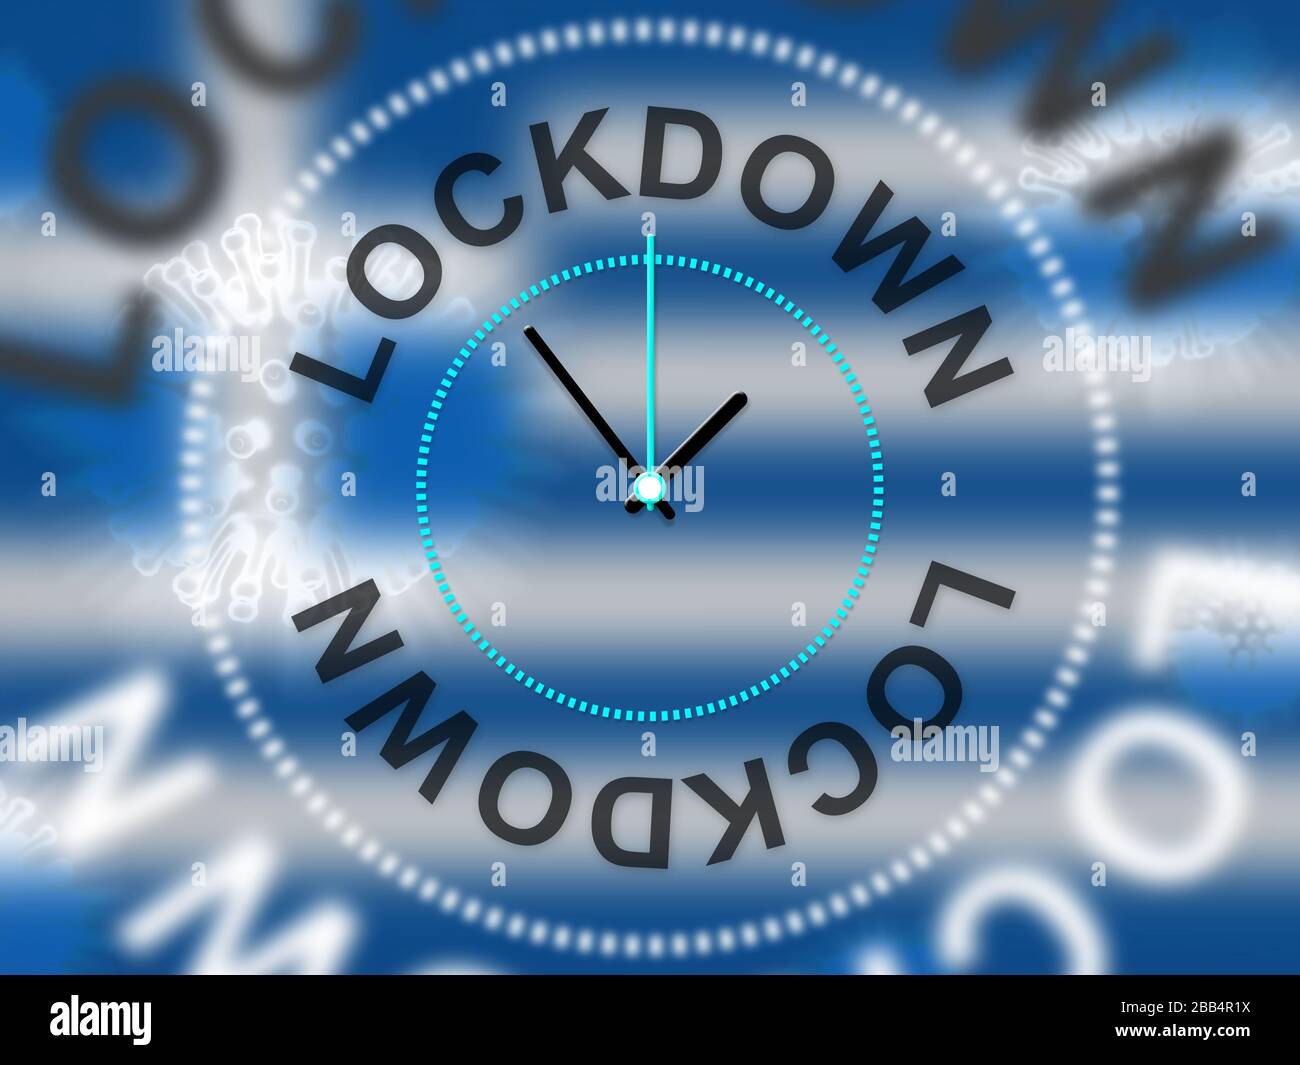 Greece lockdown against coronavirus covid-19. Greek stay home order to enforce self isolation and stop infection - 3d Illustration Stock Photo